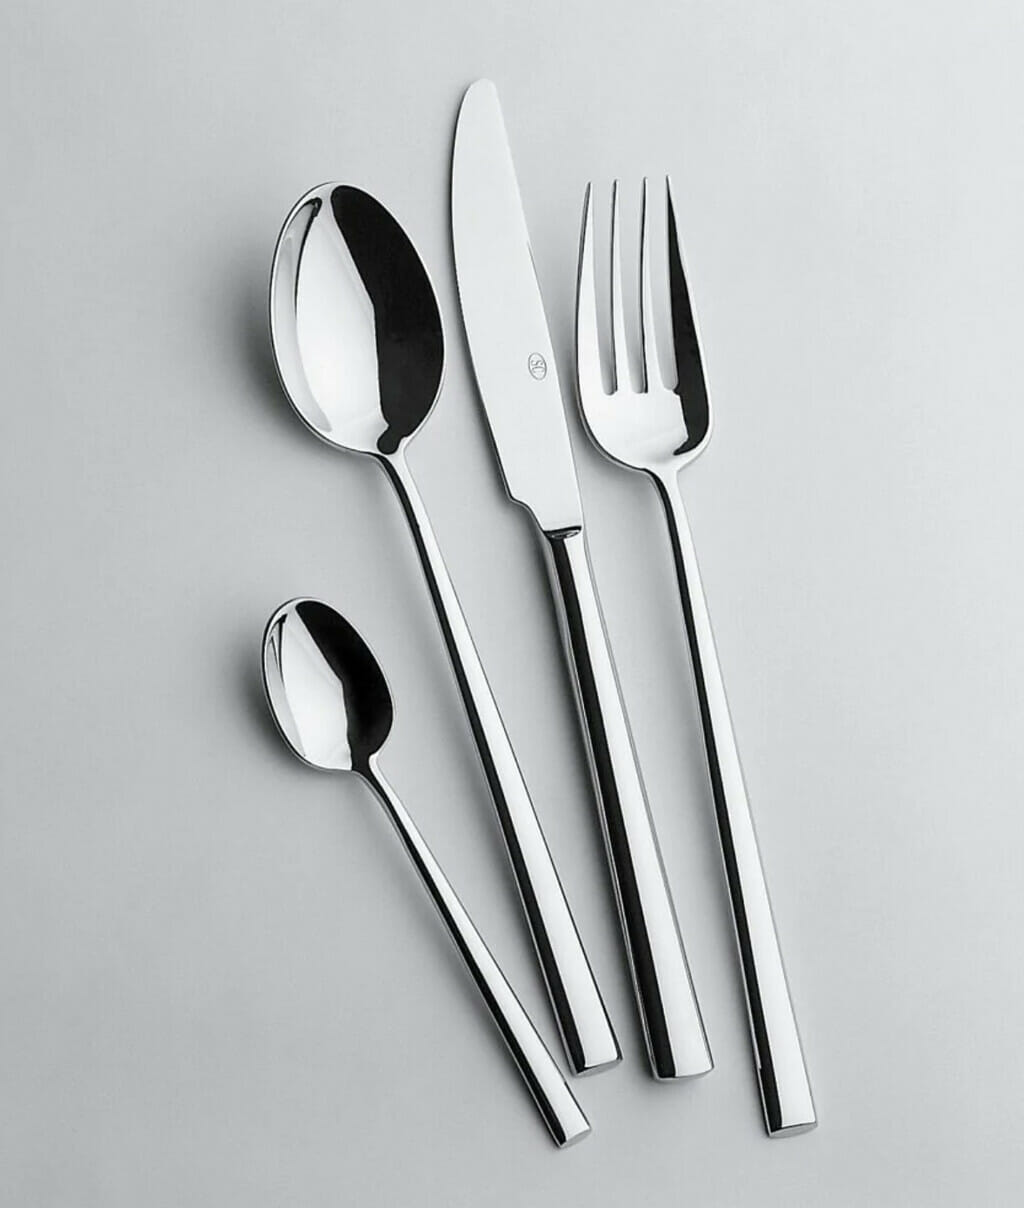 Taking Cutlery Seriously - WOMAN